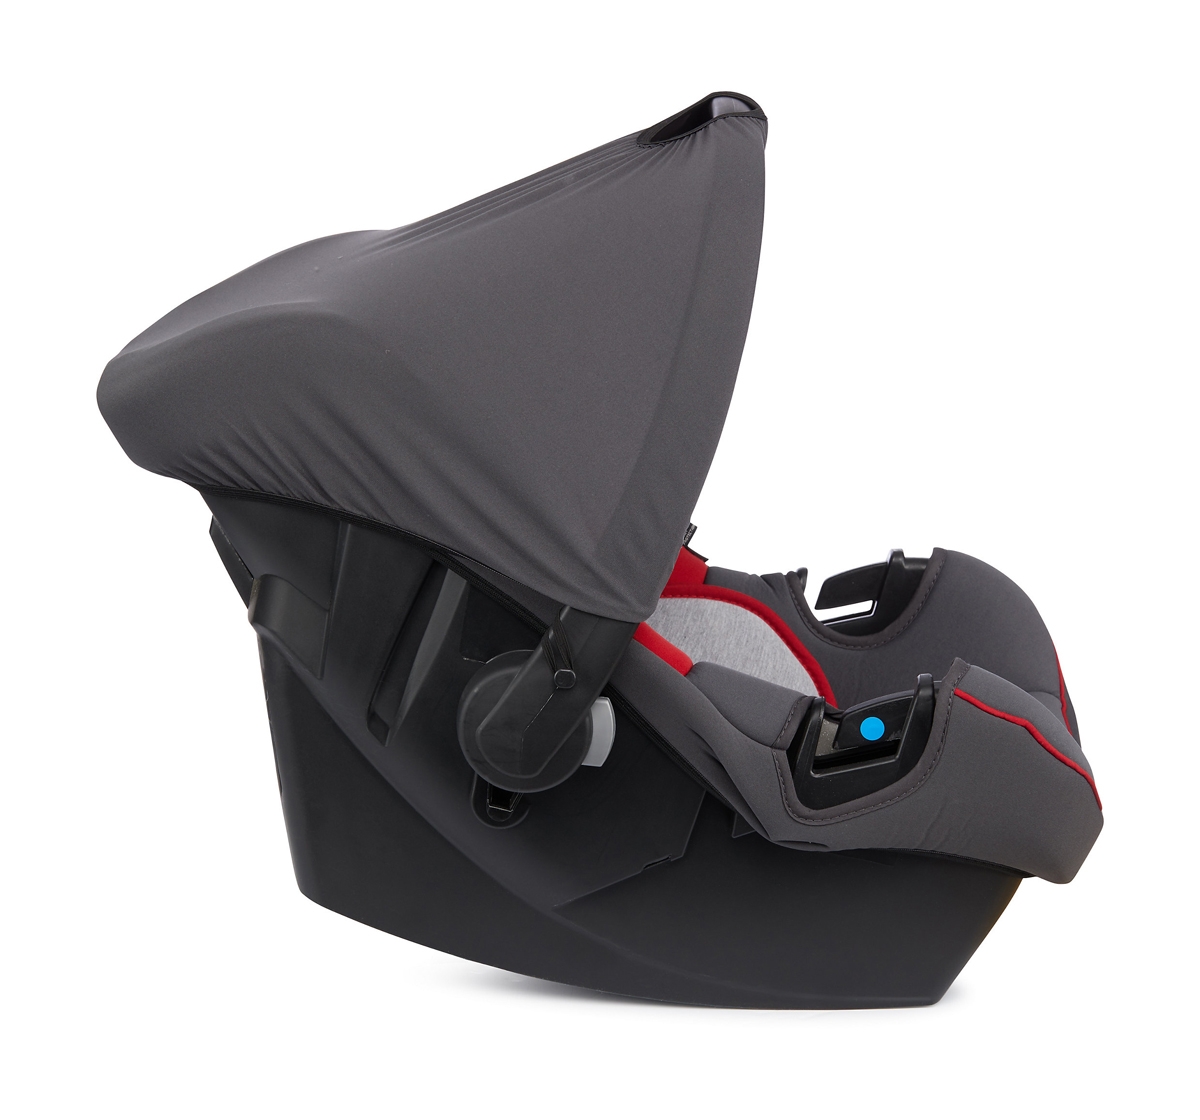 Mothercare | Mothercare Car Seat Ziba Grey And Red Multicolor 2